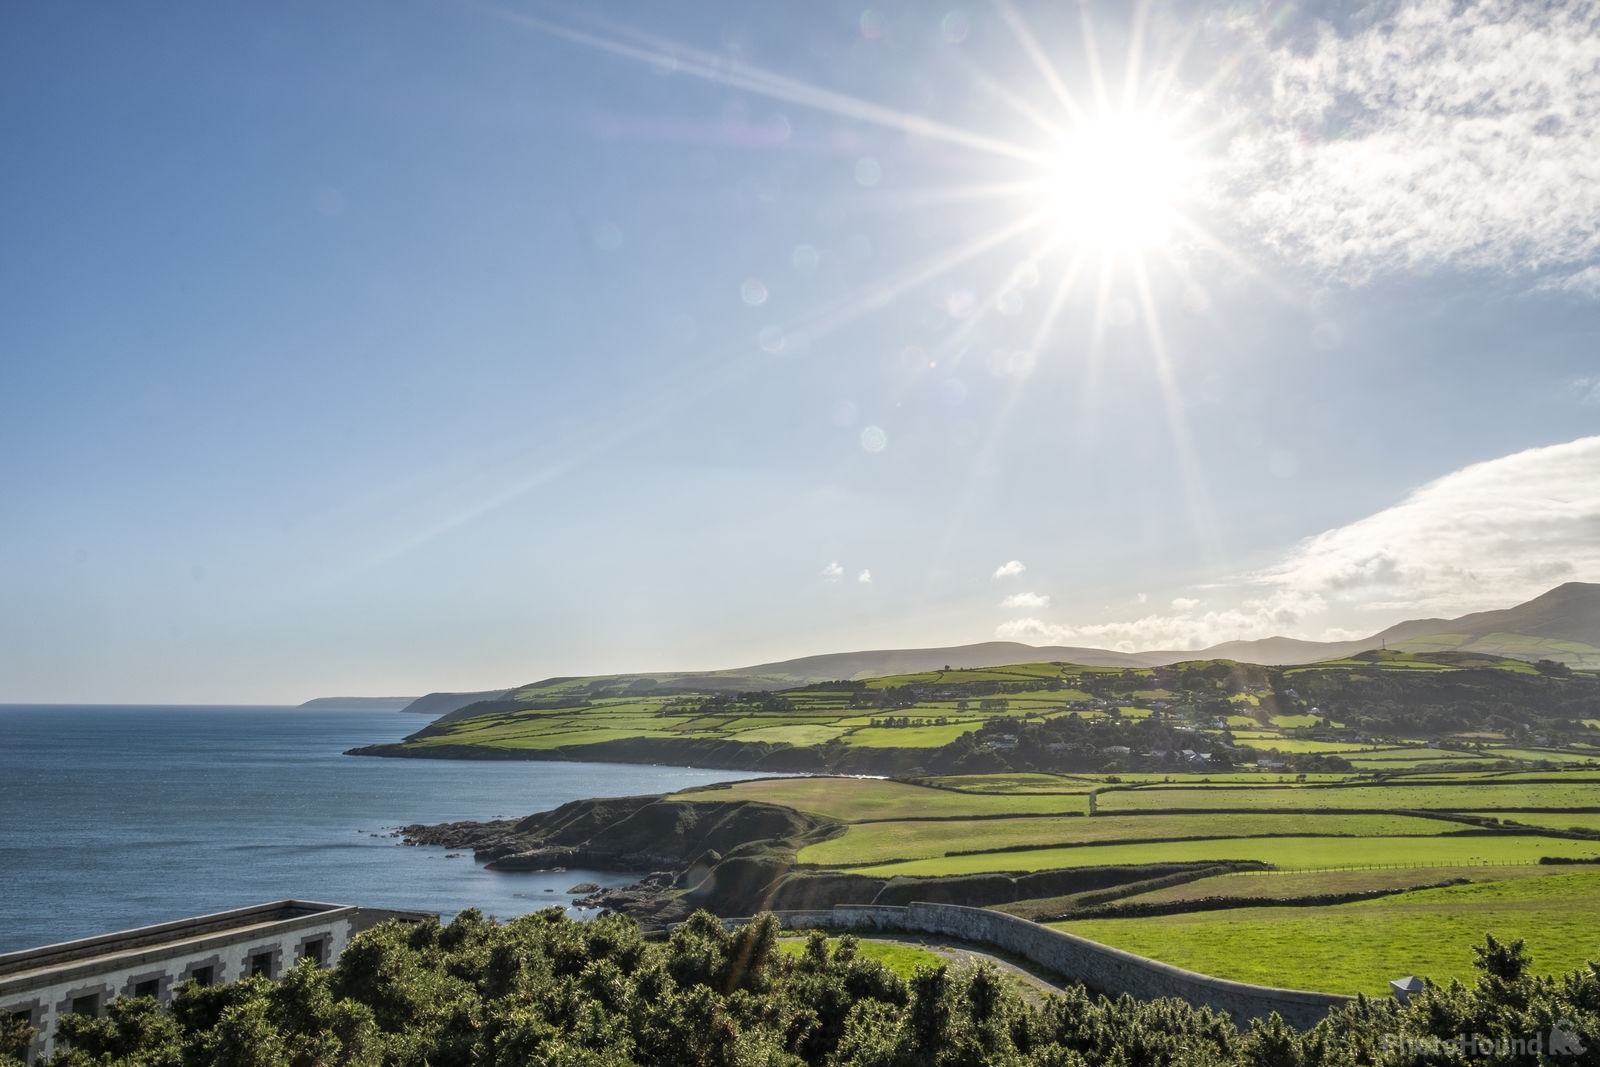 Image of Maughold Head by David Silvester